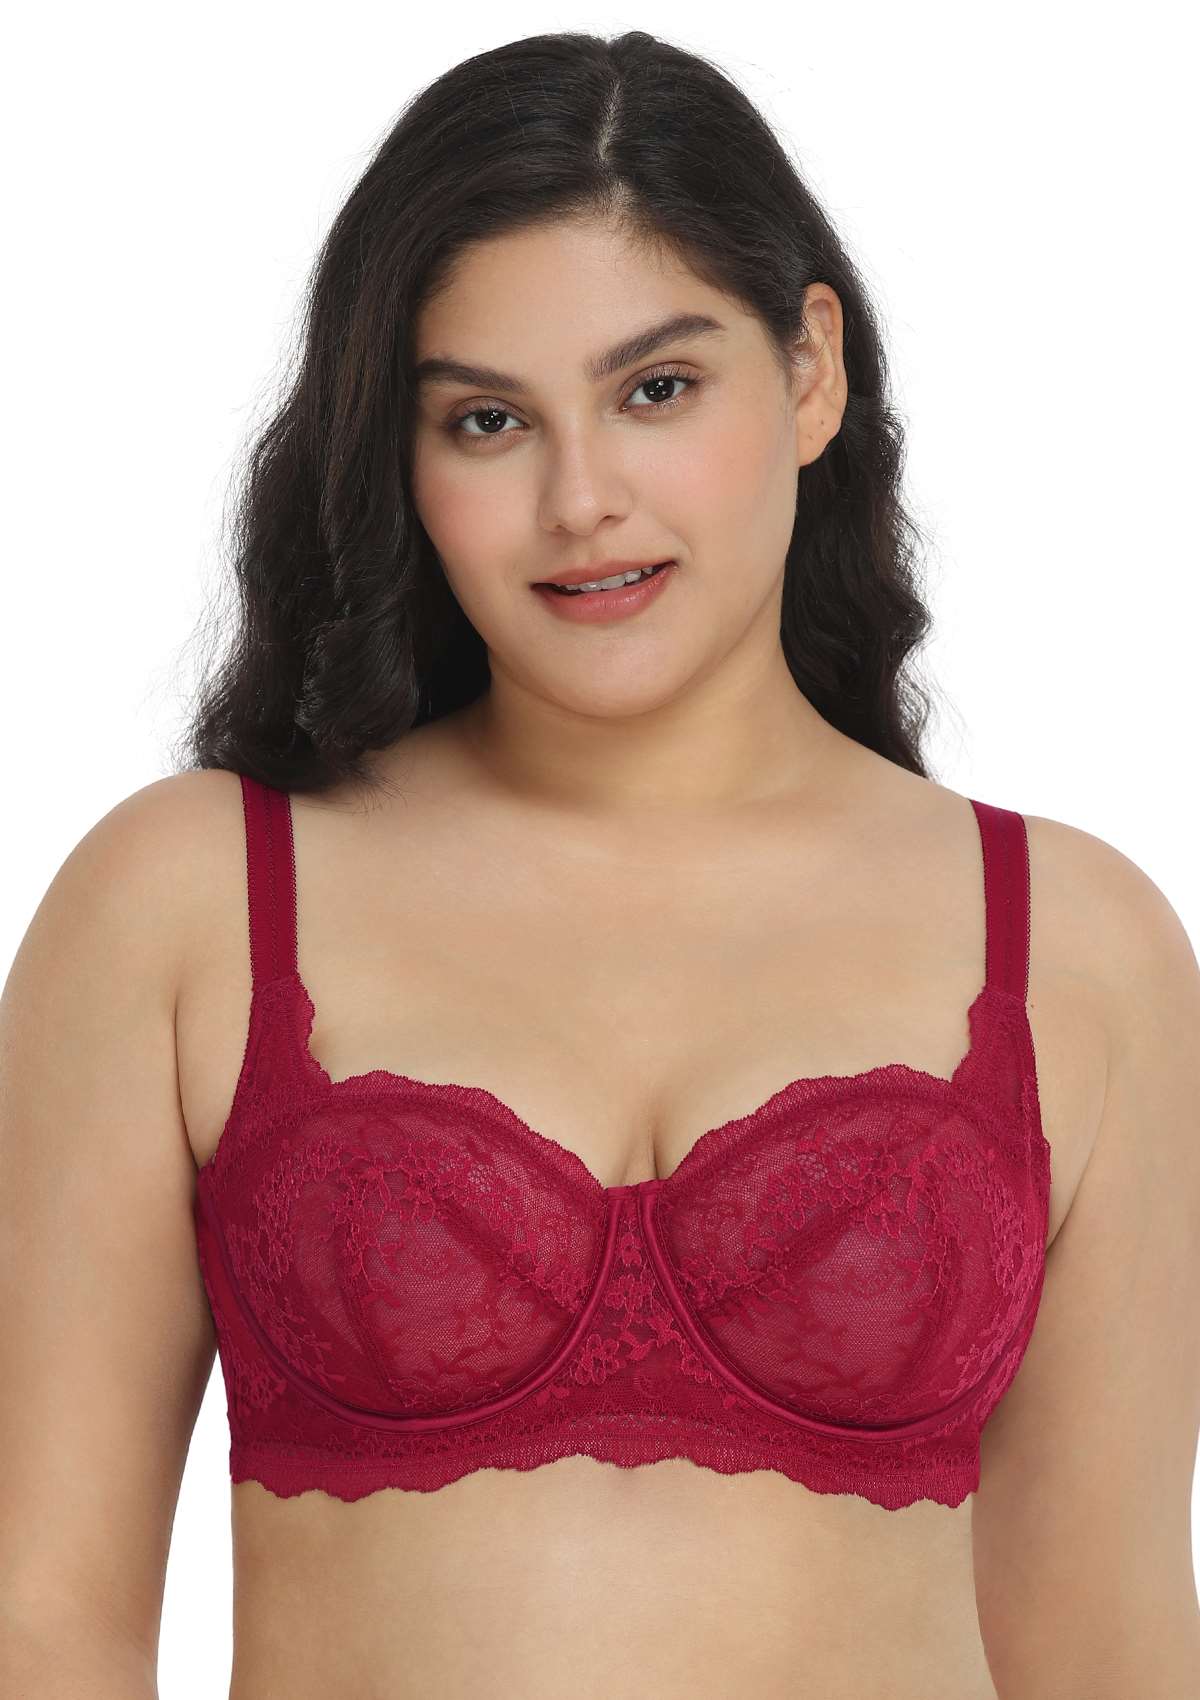 HSIA I Do Floral Lace Bridal Balconette Beautiful Bra For Special Day - Burgundy / 40 / C